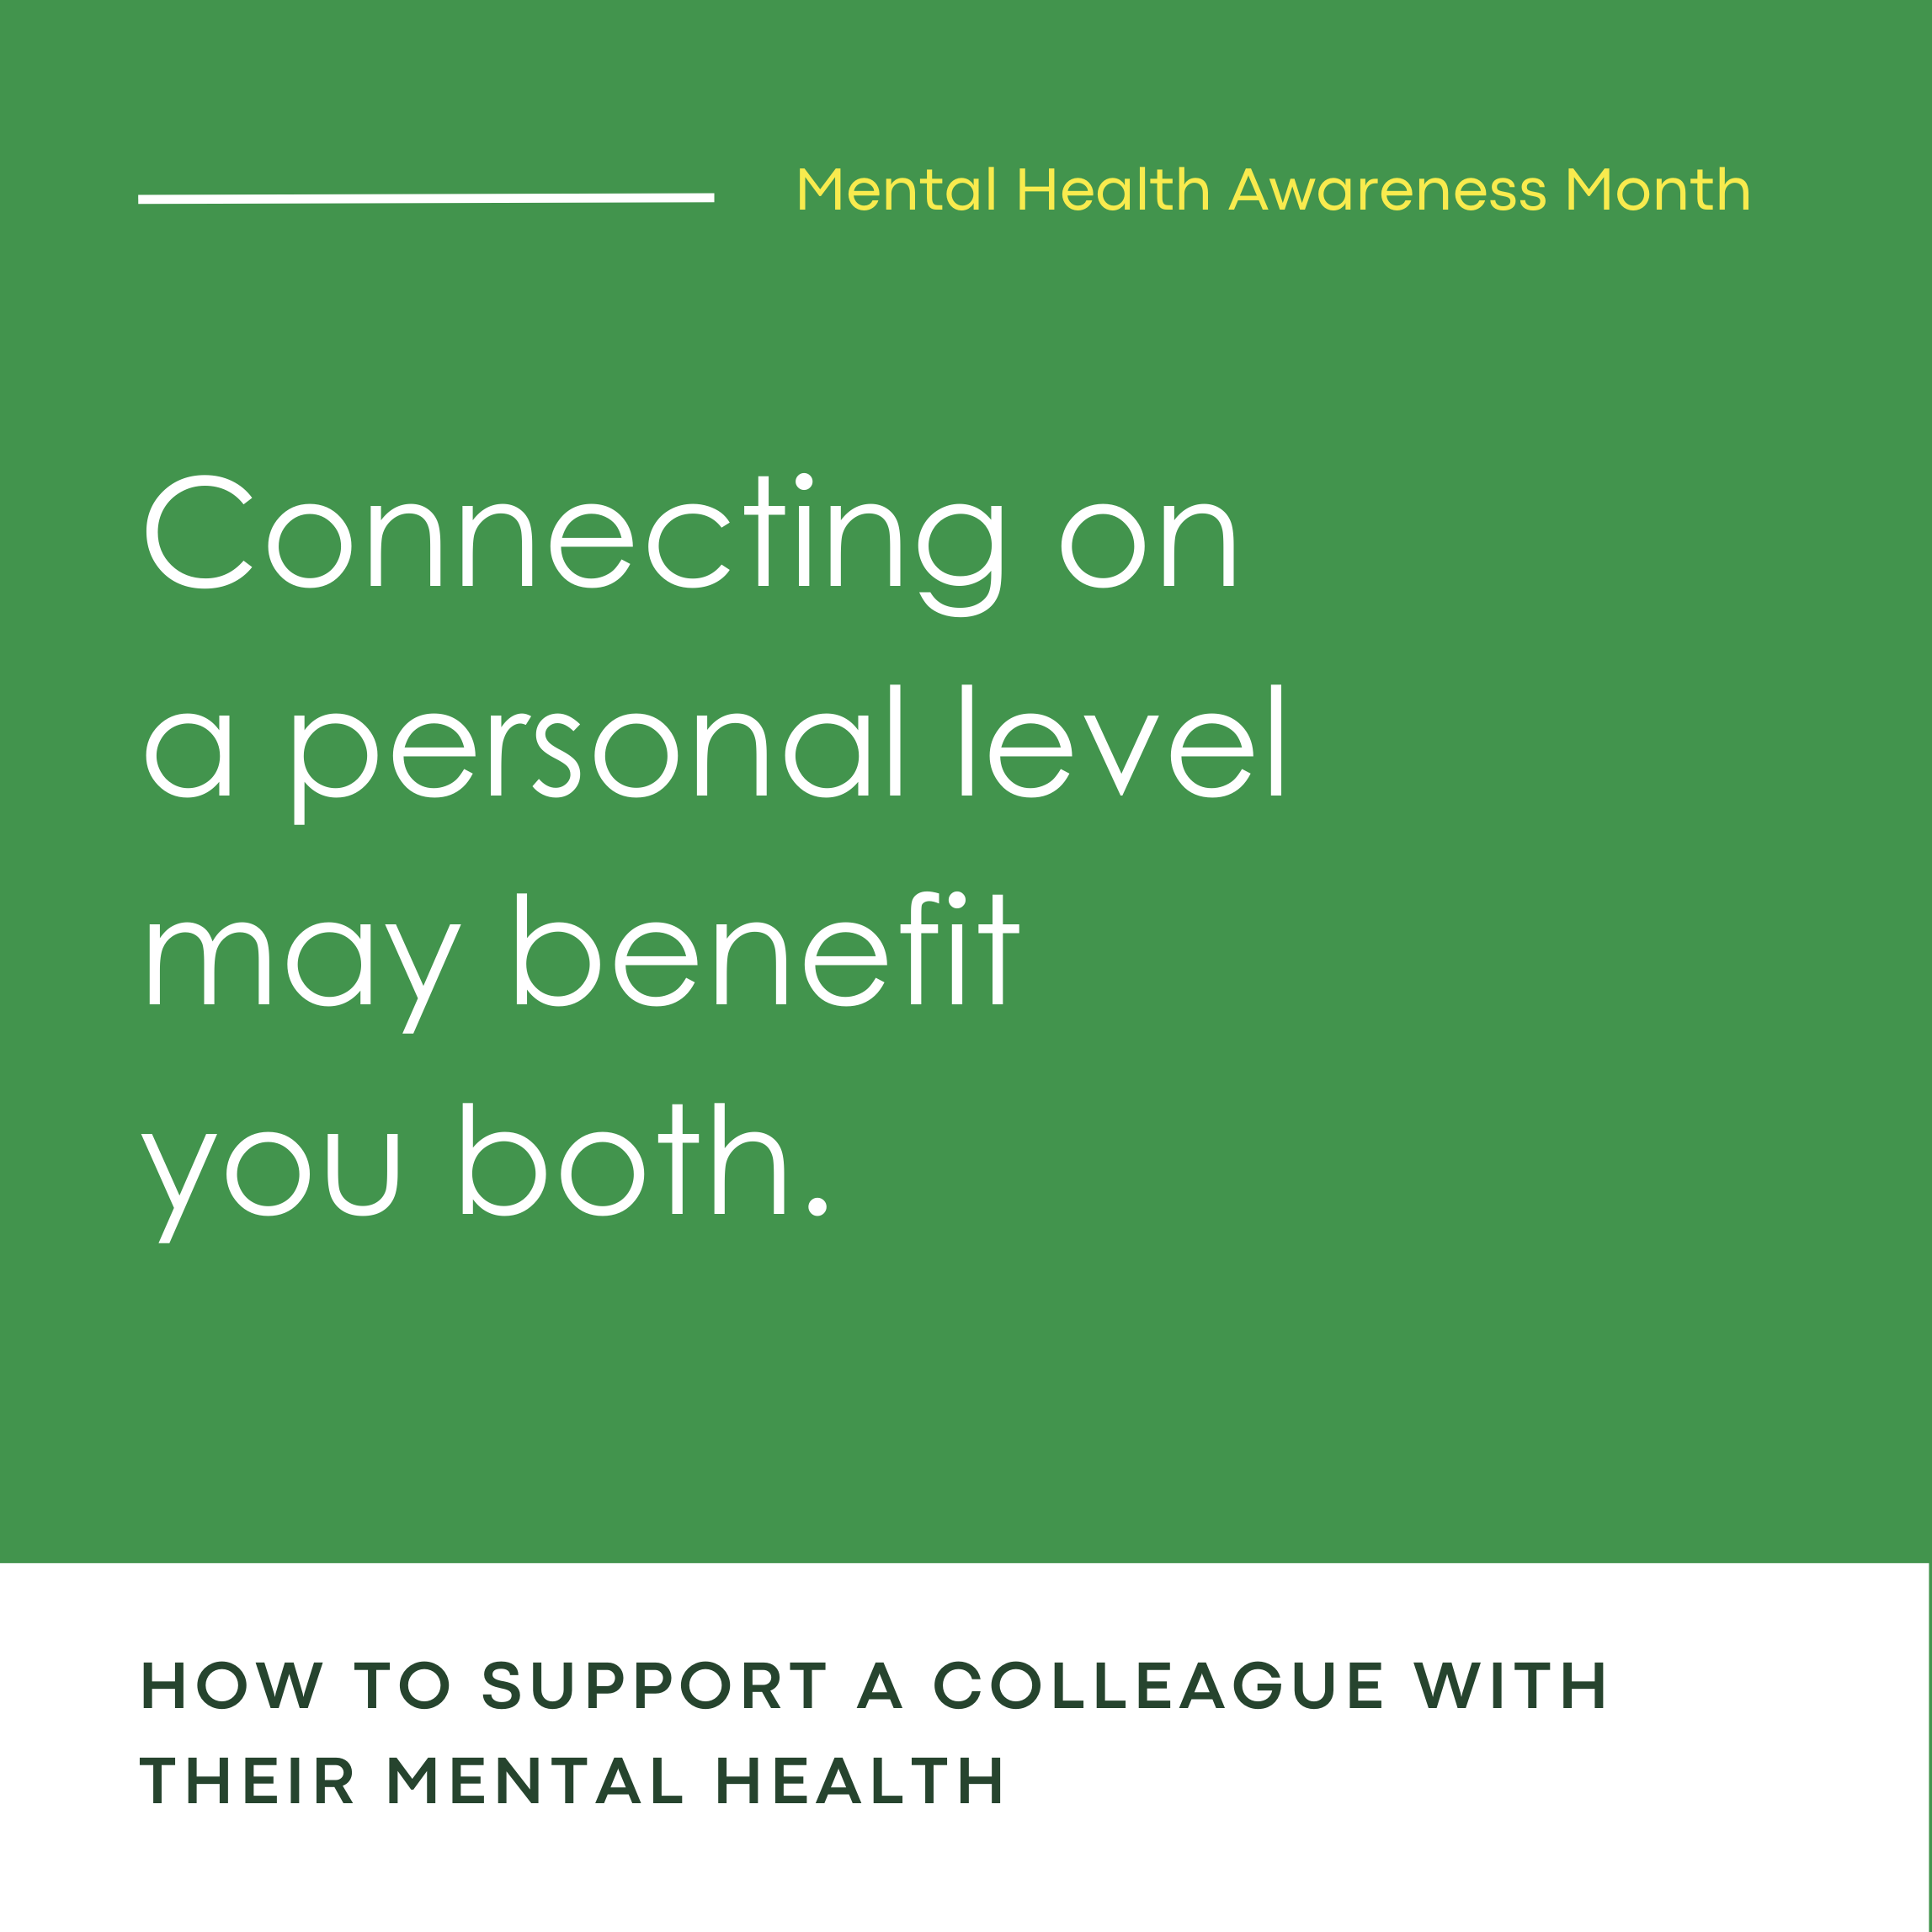 Connecting on a personal level may benefit you both